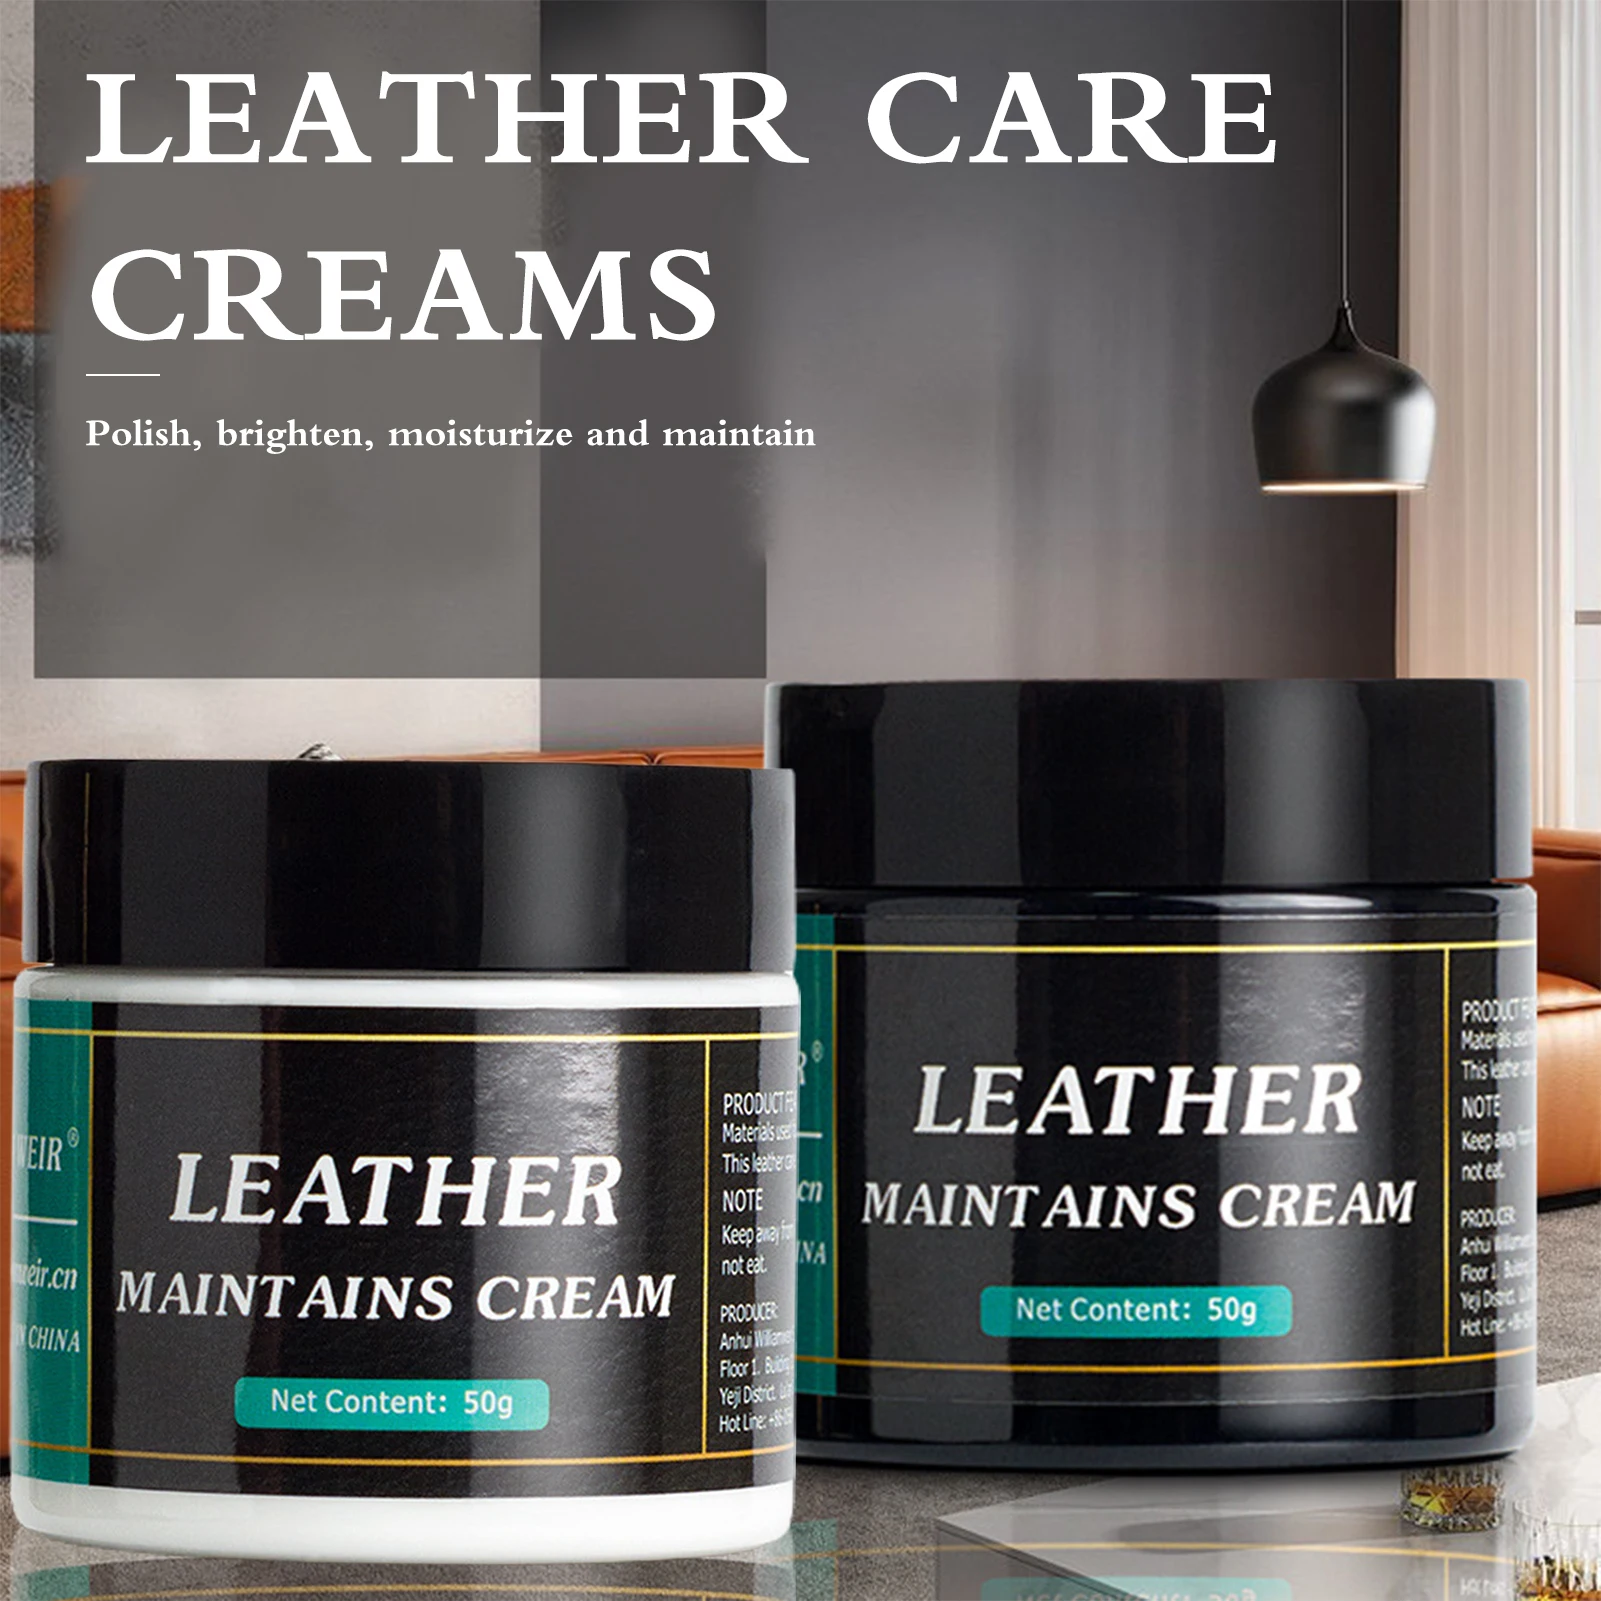 

Leather Maintenance Cream Scratch Repair Restore Faded Renew Leather Restorer Leather Care Products Leather Repair Cream PR Sale